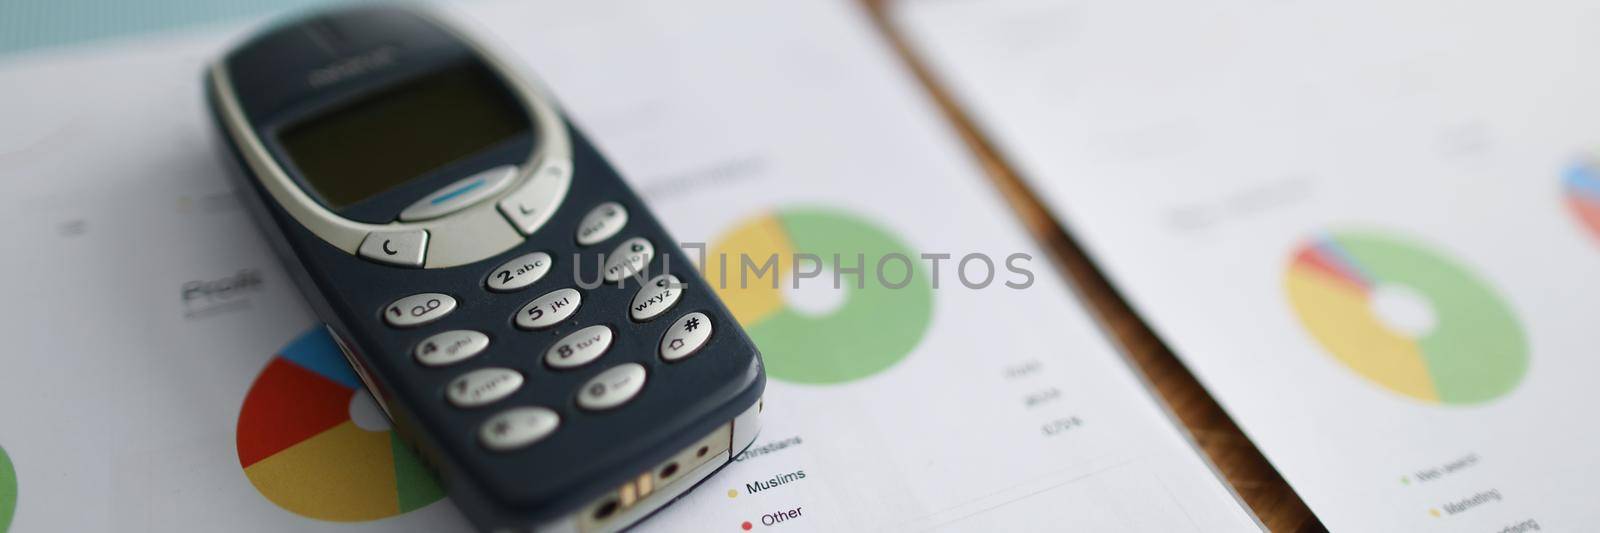 Minsk, Belarus- September 19, 2019: Nokia 3310 mobile phone lying on documents with graphs closeup. Classic business scheme concept